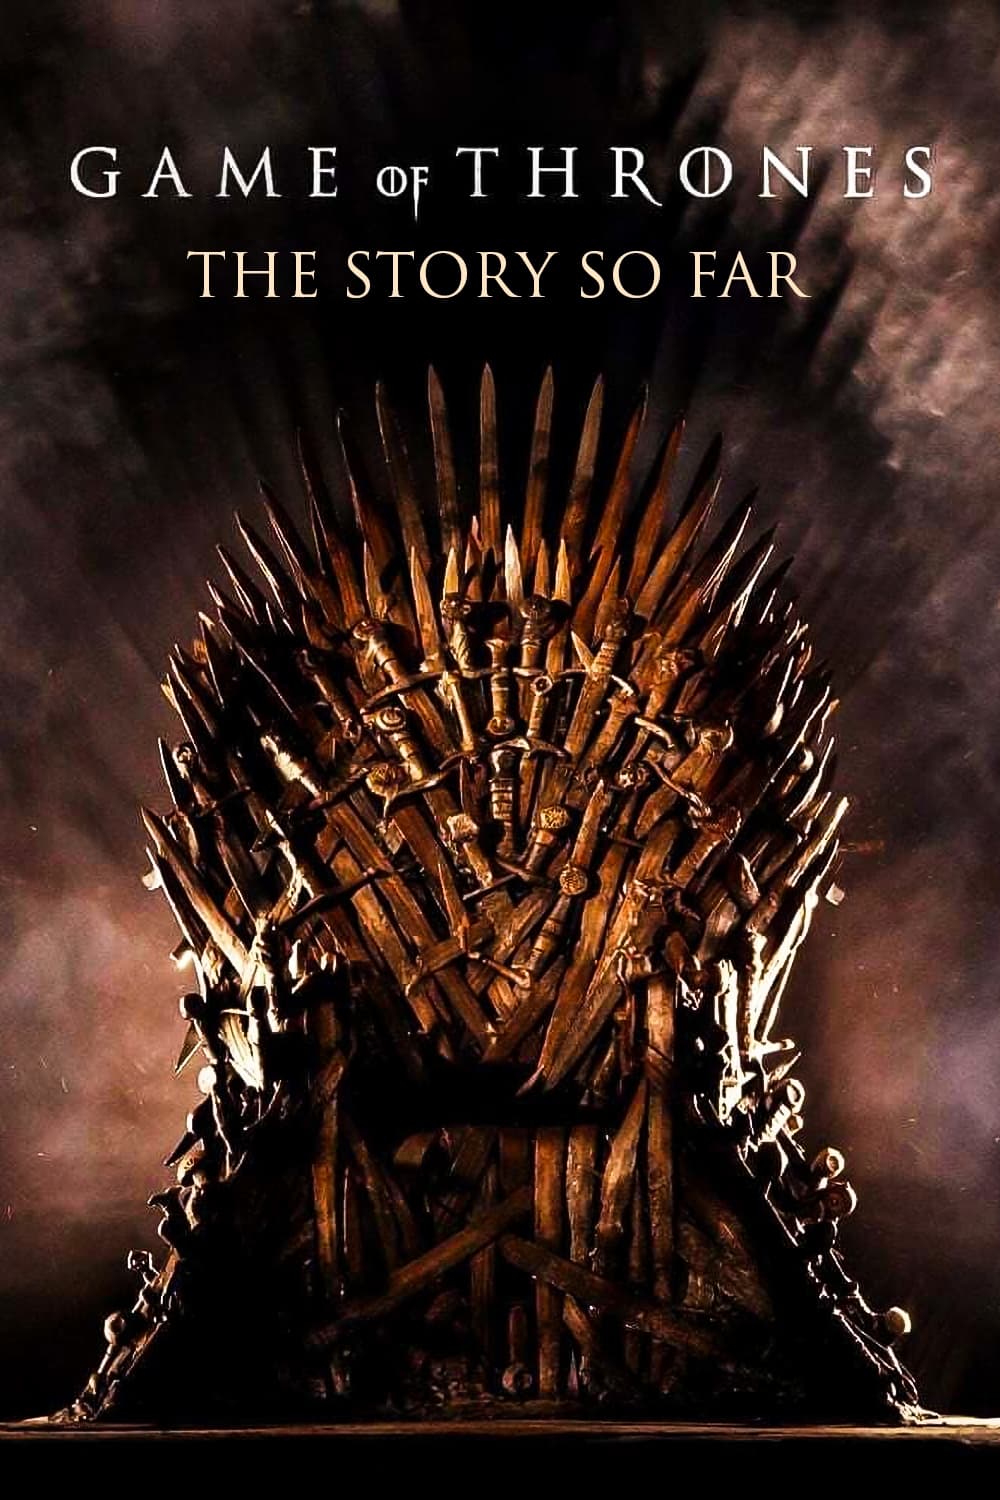 Game of Thrones: The Story So Far